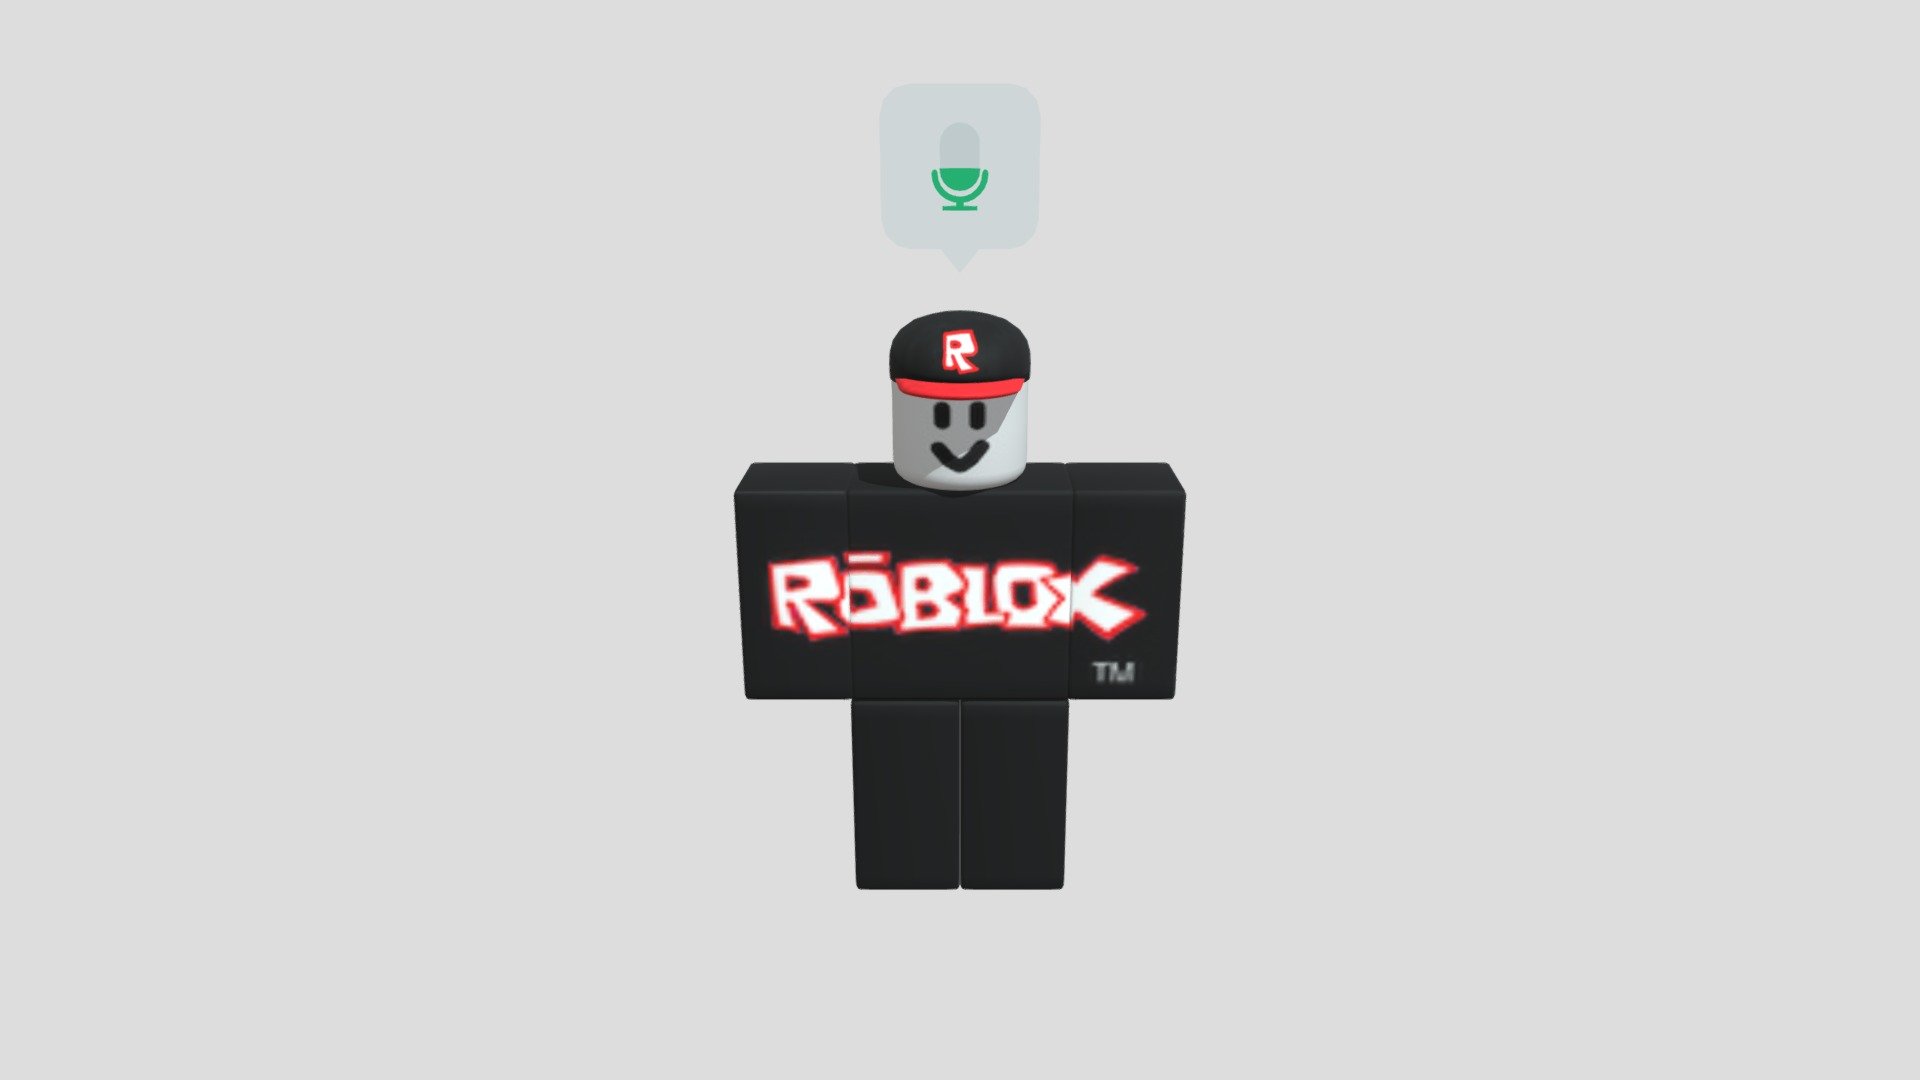 Roblox Guest